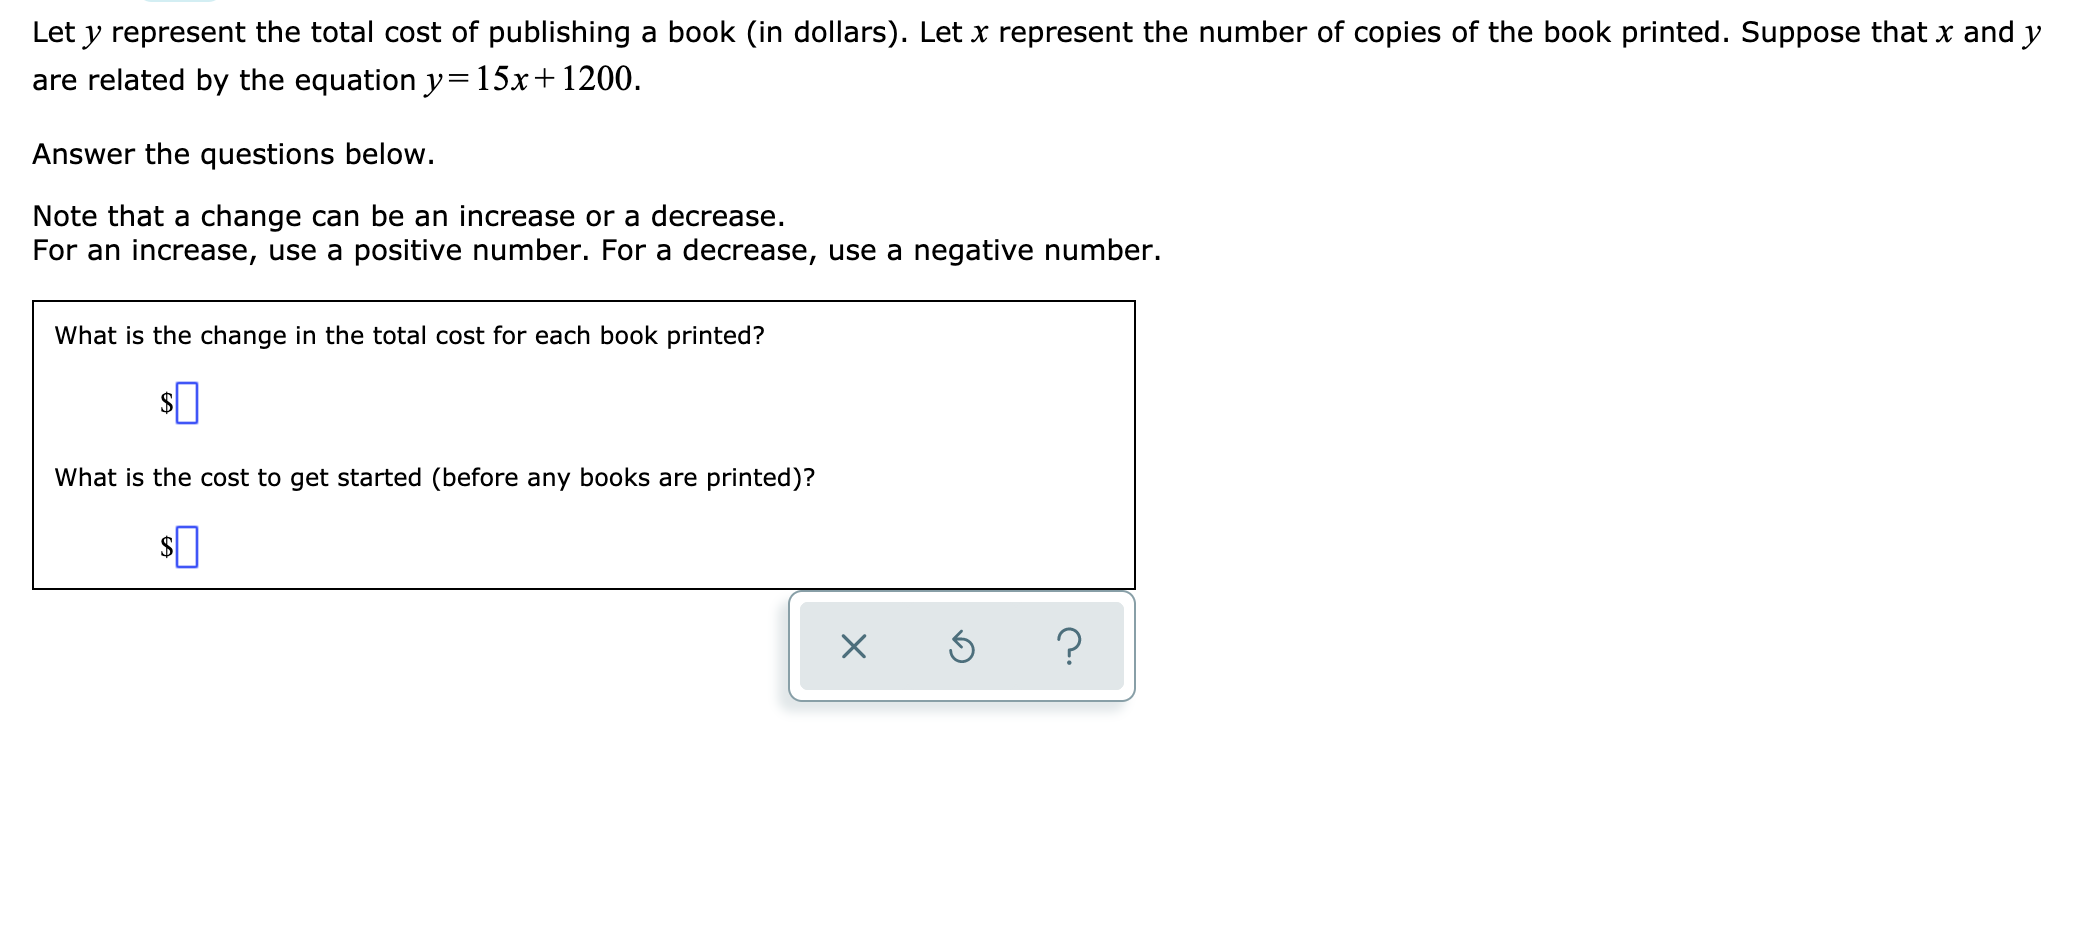 Let y represent the total cost of publishing
a book (in dollars). Let x represent the number of copies of the book printed. Suppose that x and y
are related by the equation y= 15x+ 1200.
Answer the questions below.
Note that a change can be an increase or a decrease
For an increase, use a positive number. For a decrease, use a negative number.
What is the change in the total cost for each book printed?
What is the cost to get started (before any books are
printed)?
X
